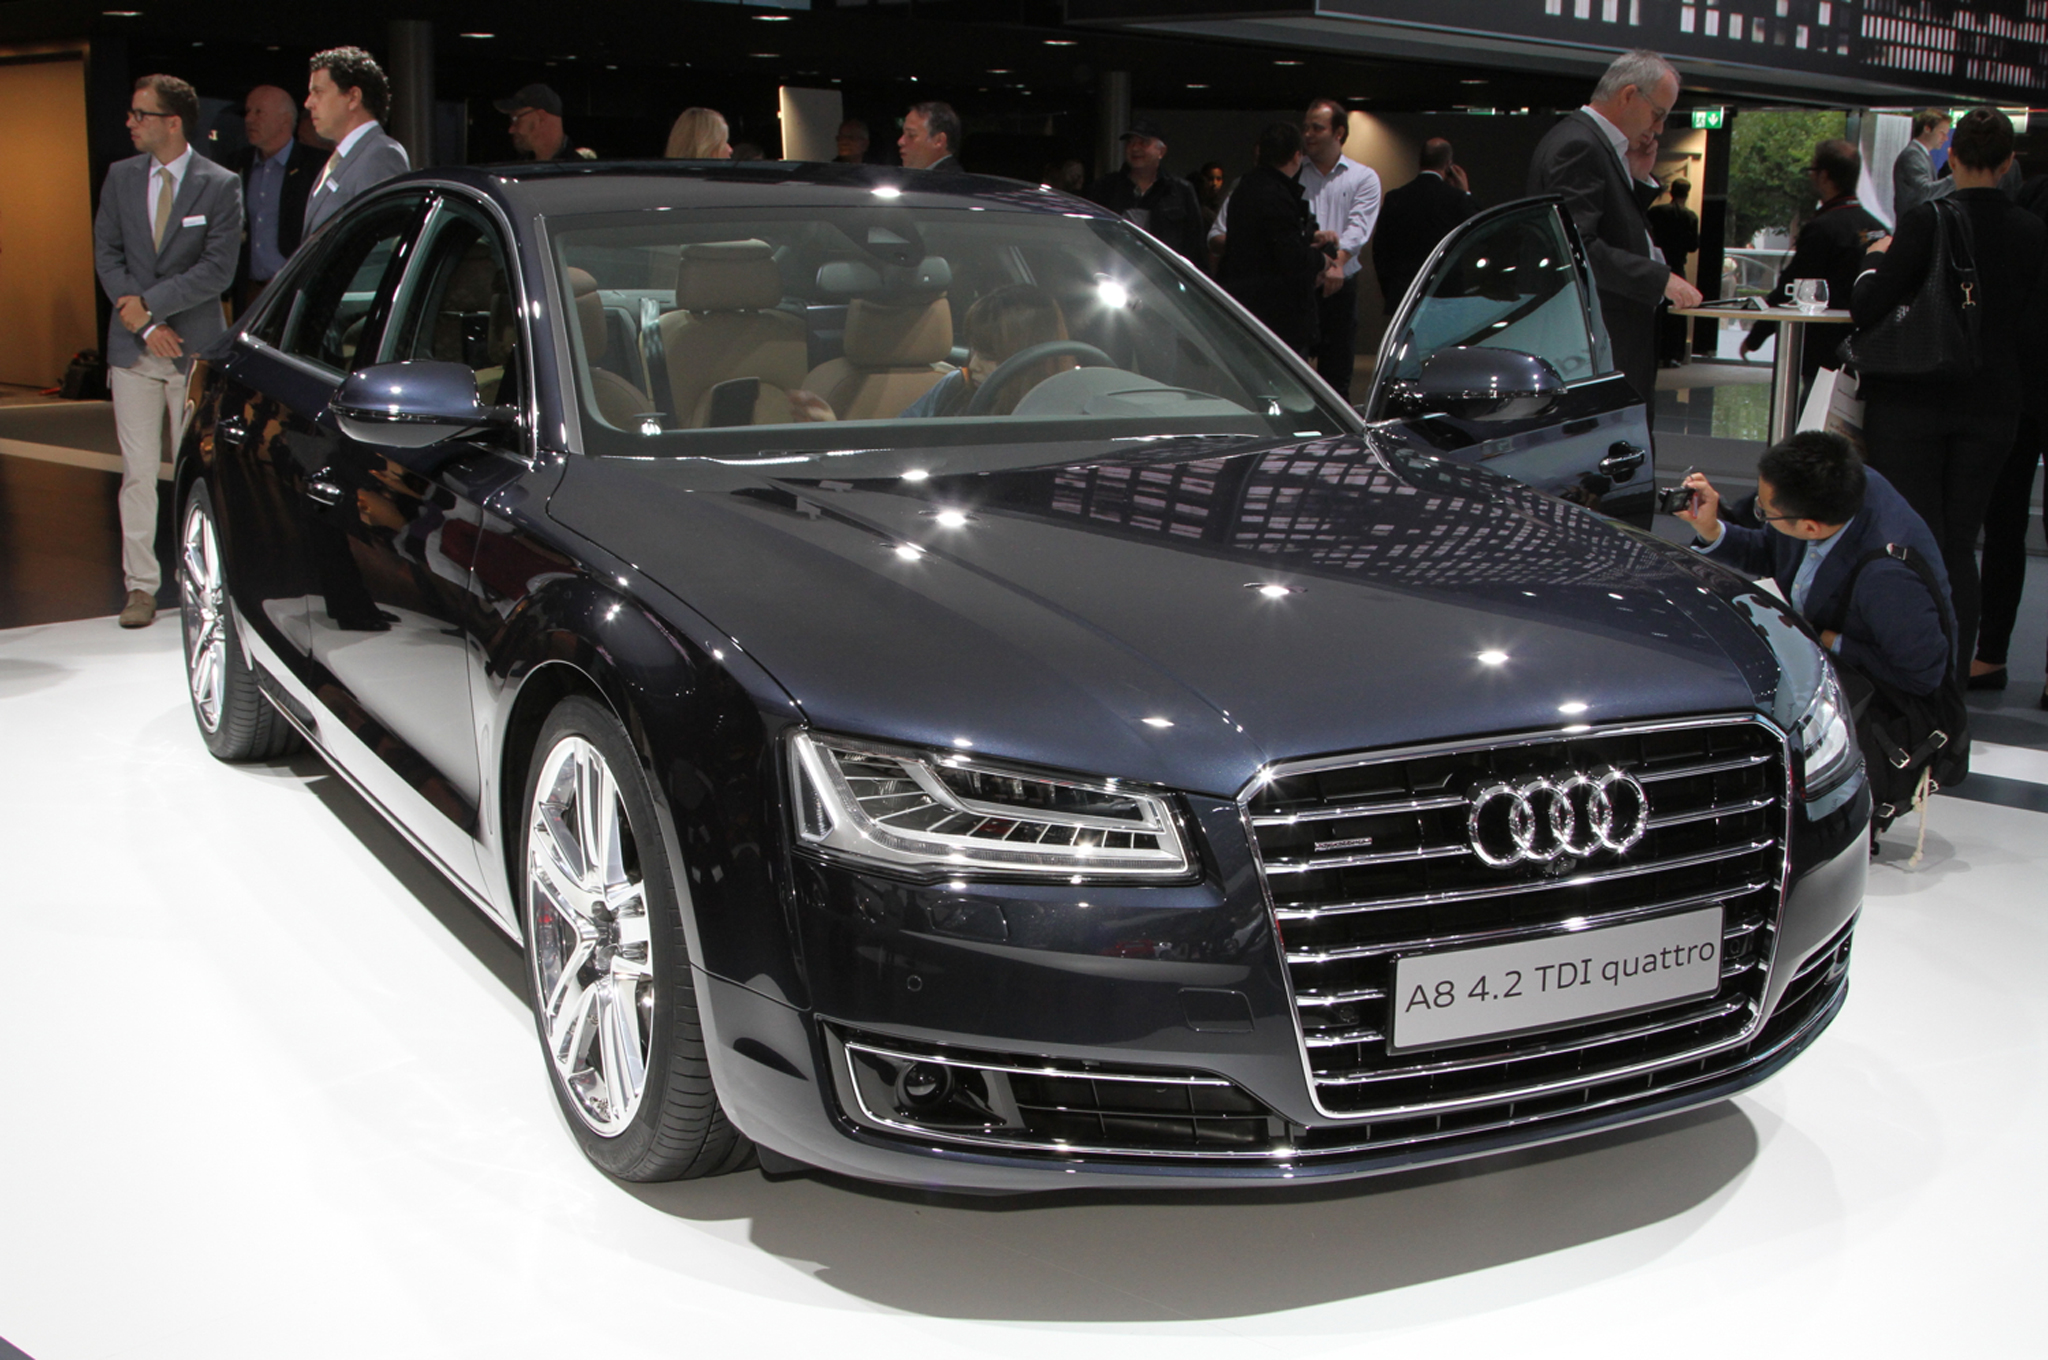 A8 Audi 2015 - it's time to move forward #9